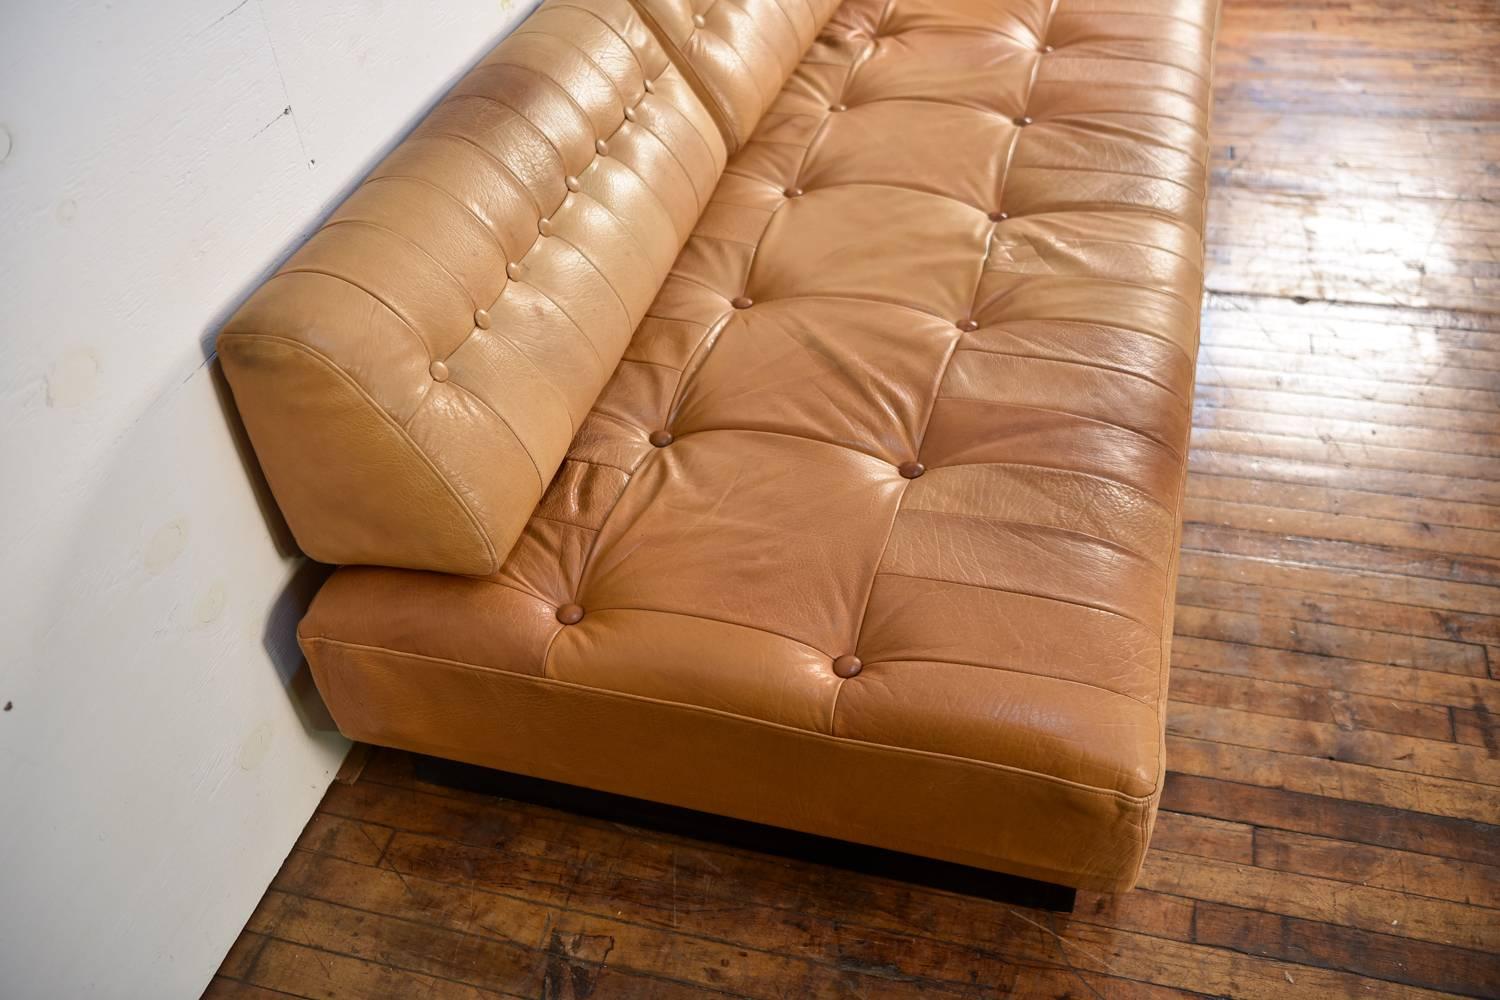 Danish Midcentury De Sede Style Butterscotch Colored Leather Sofa or Daybed 3